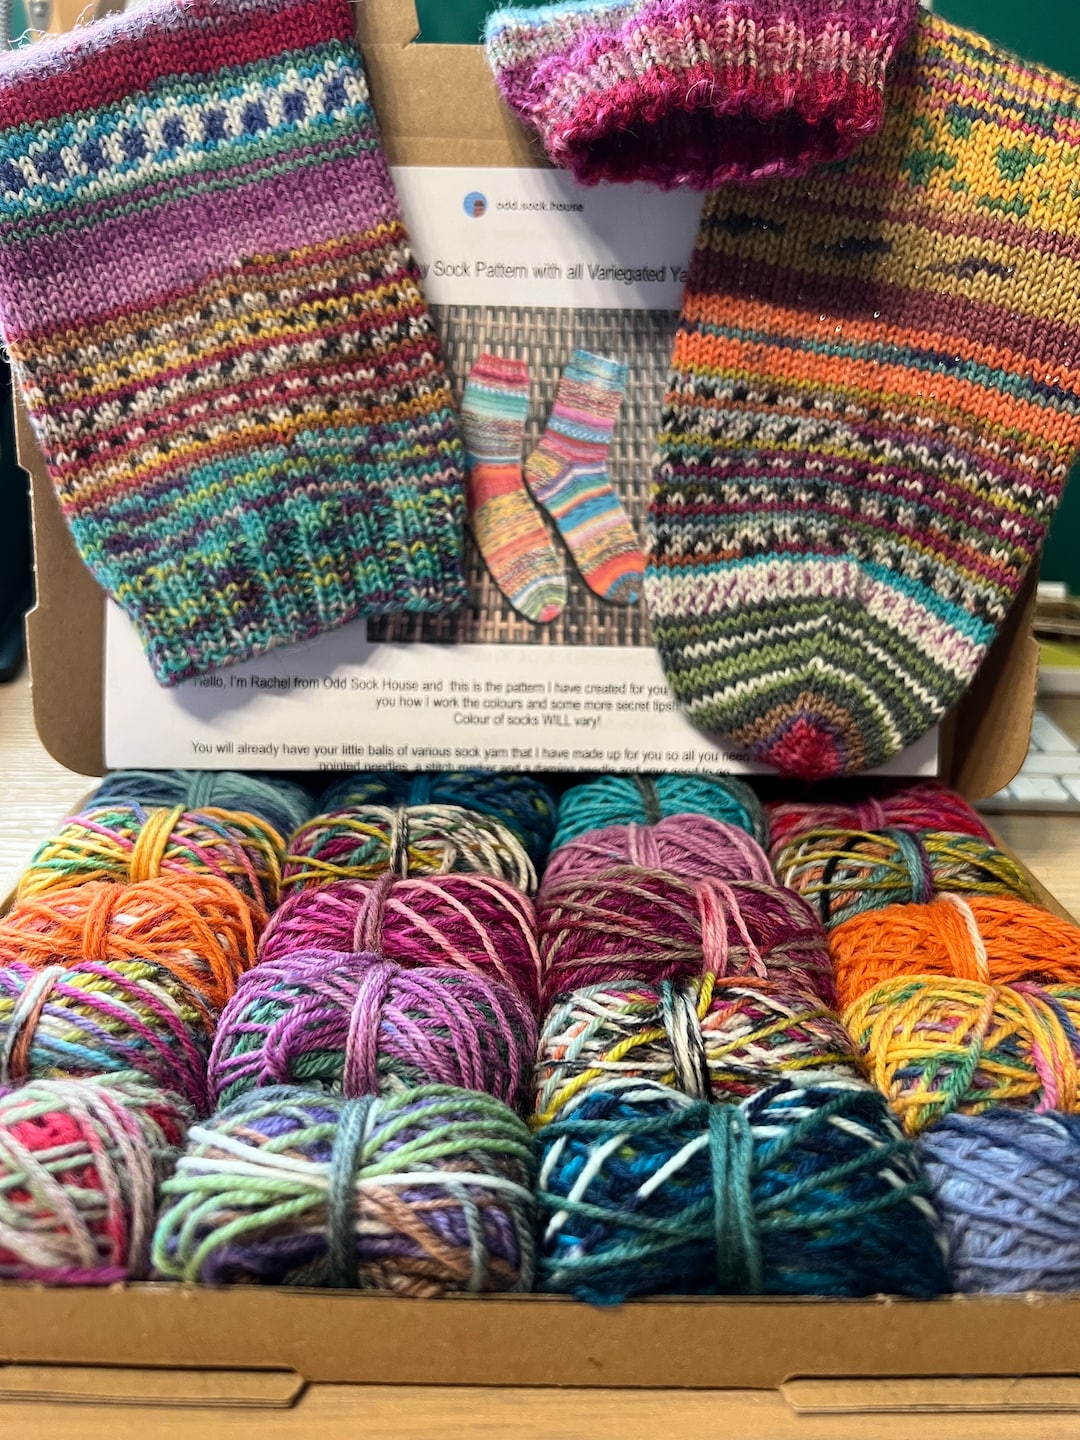 Scrappy Socks Knitting Kit With All Variegated Yarn - Etsy